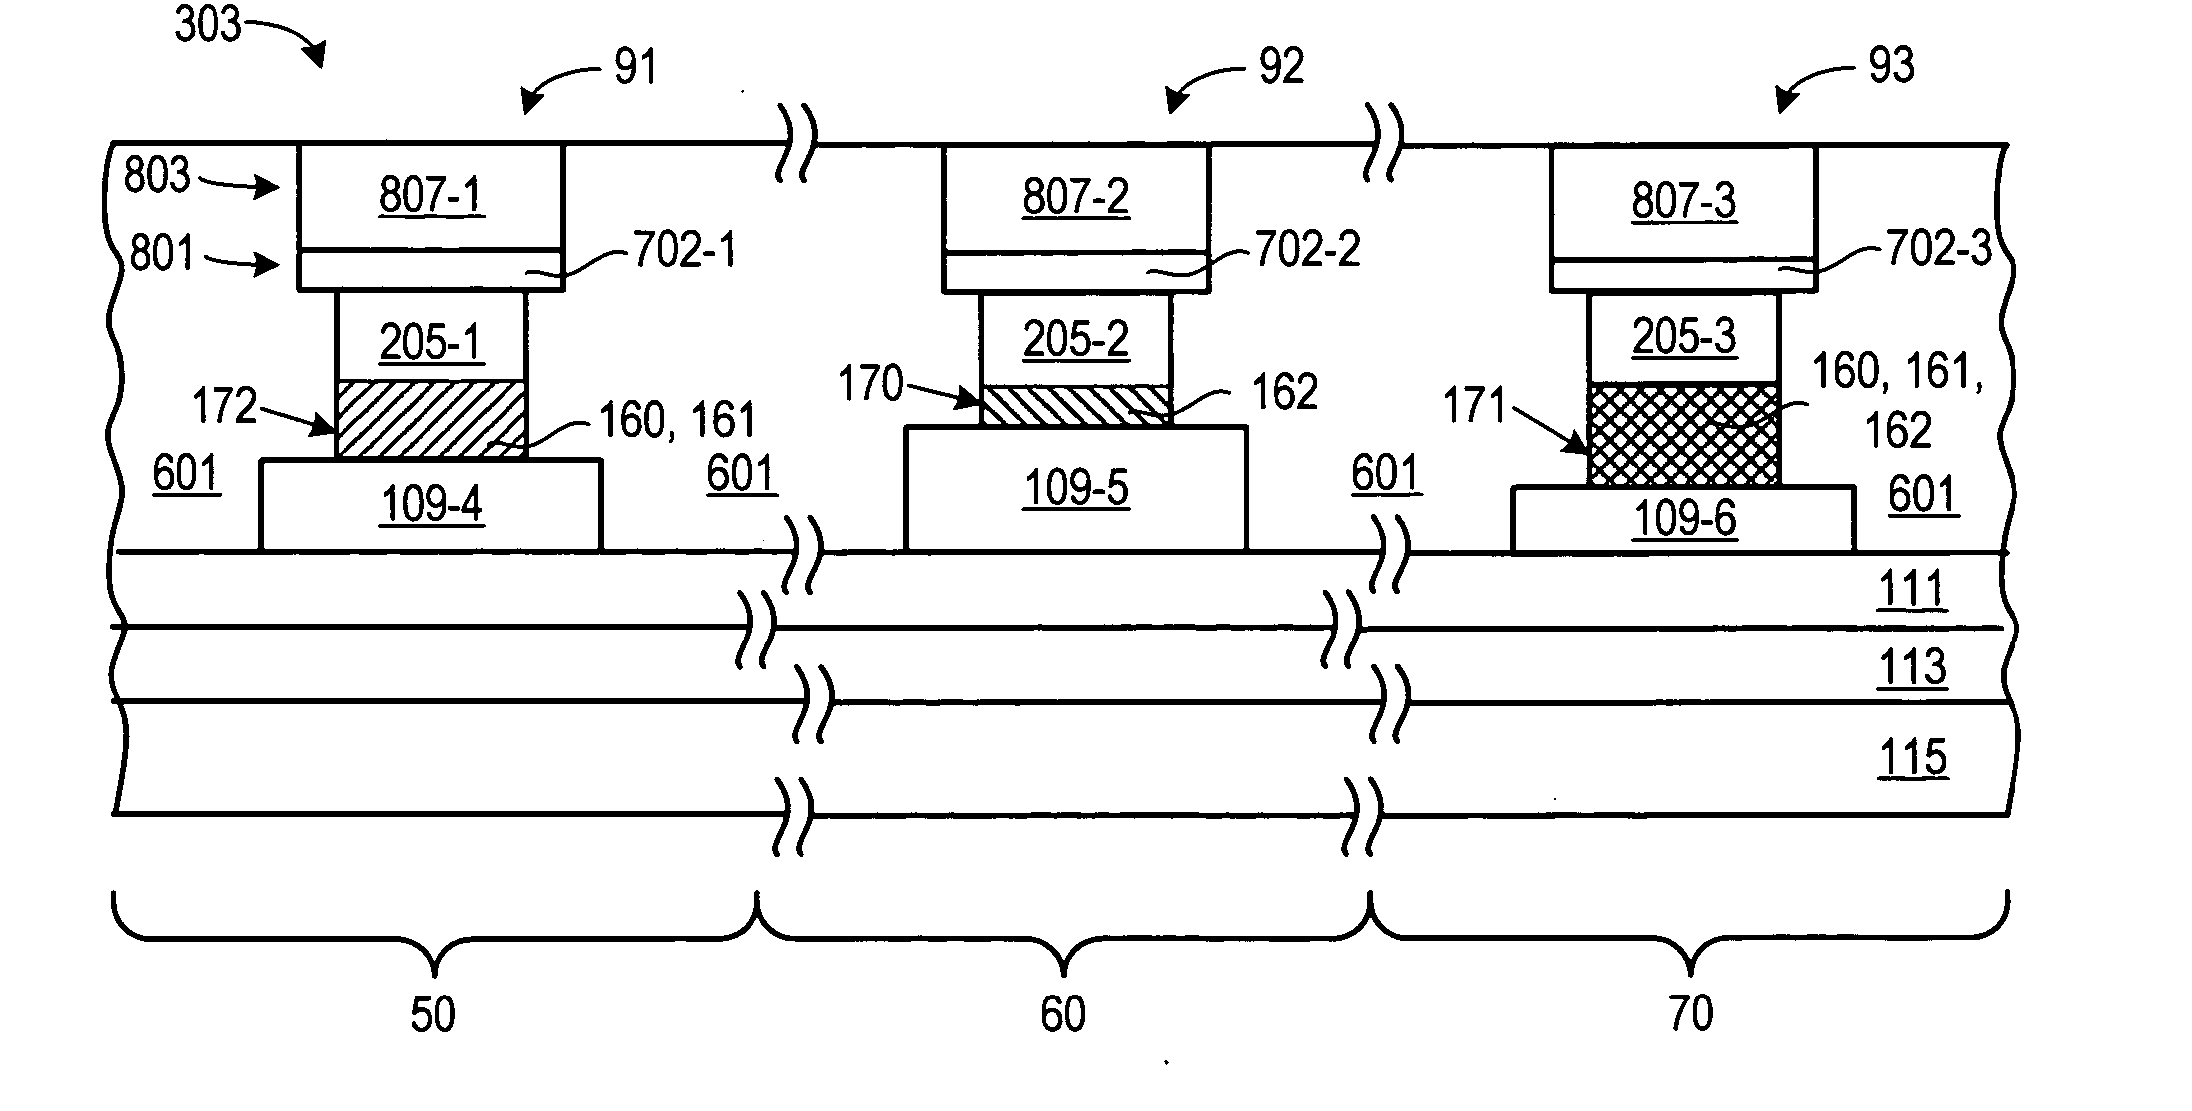 Structure and manufacturing method of multi-gate dielectric thicknesses for planar double gate device having multi-threshold voltages